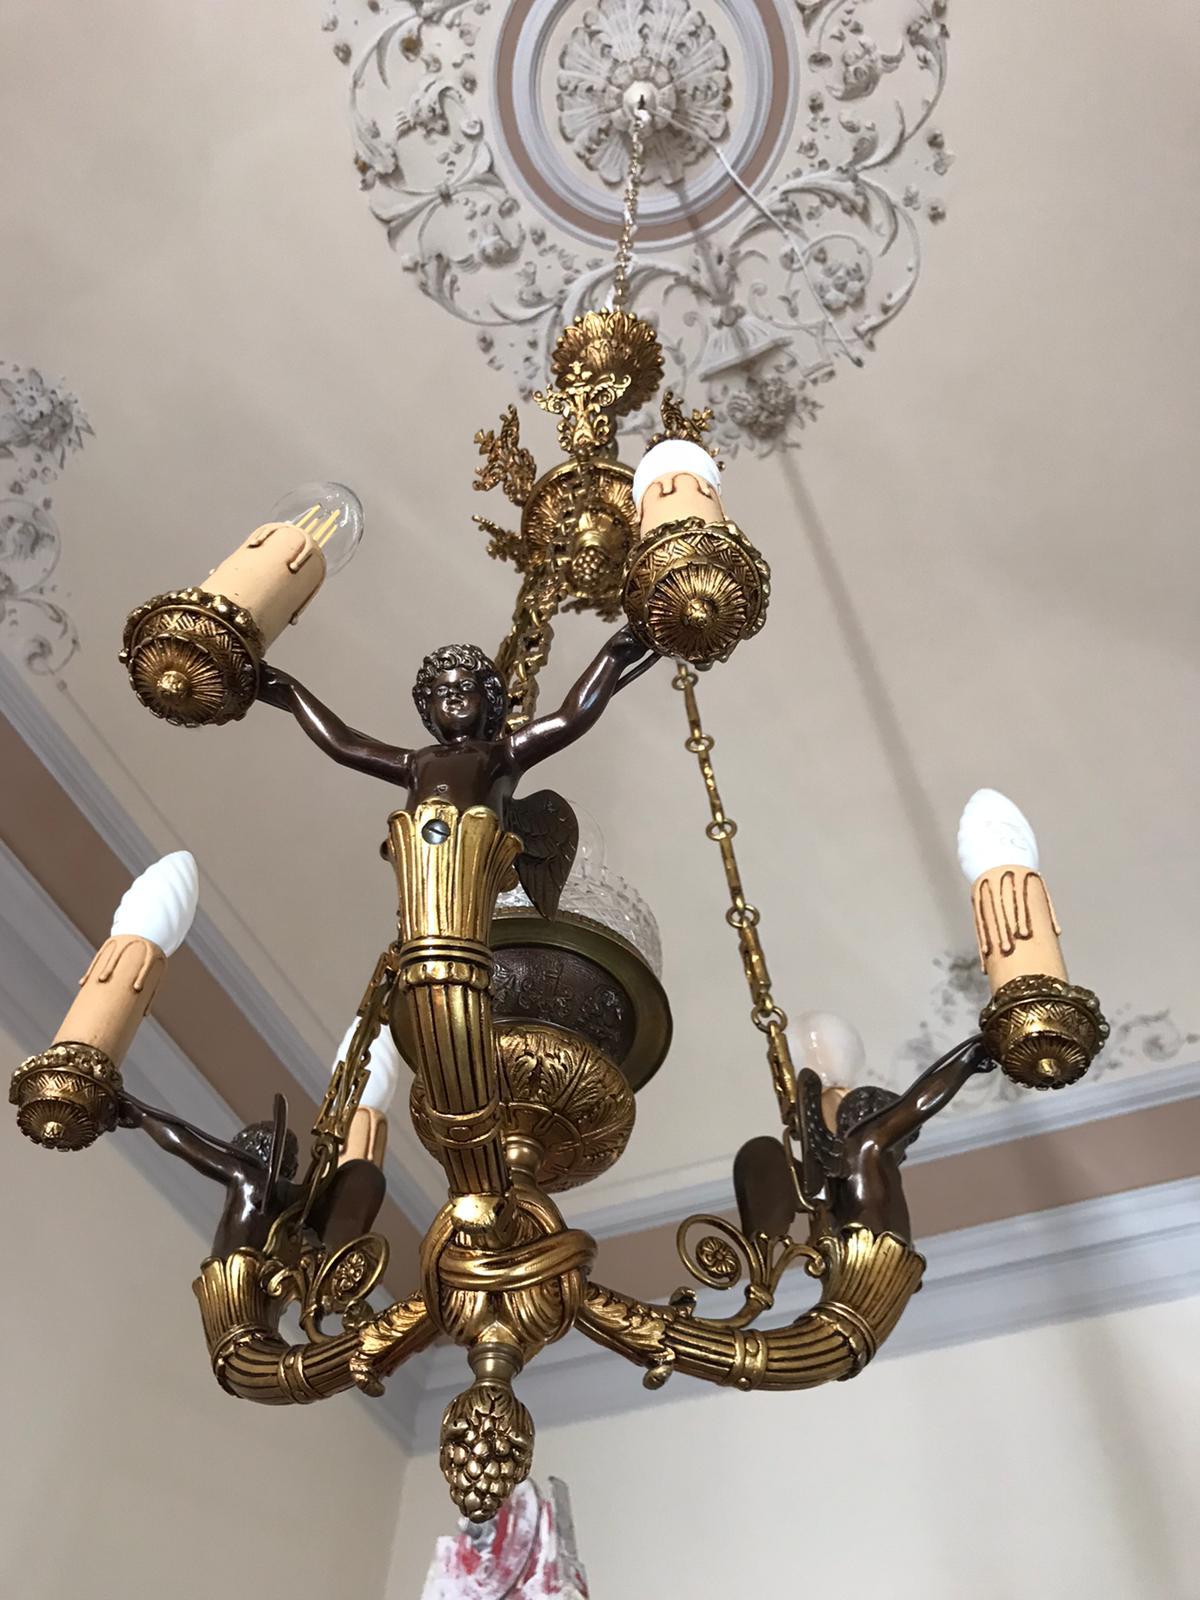 Prince Louis XV style French chandelier. In gilded bronze with three patinated putti holding two-light each.